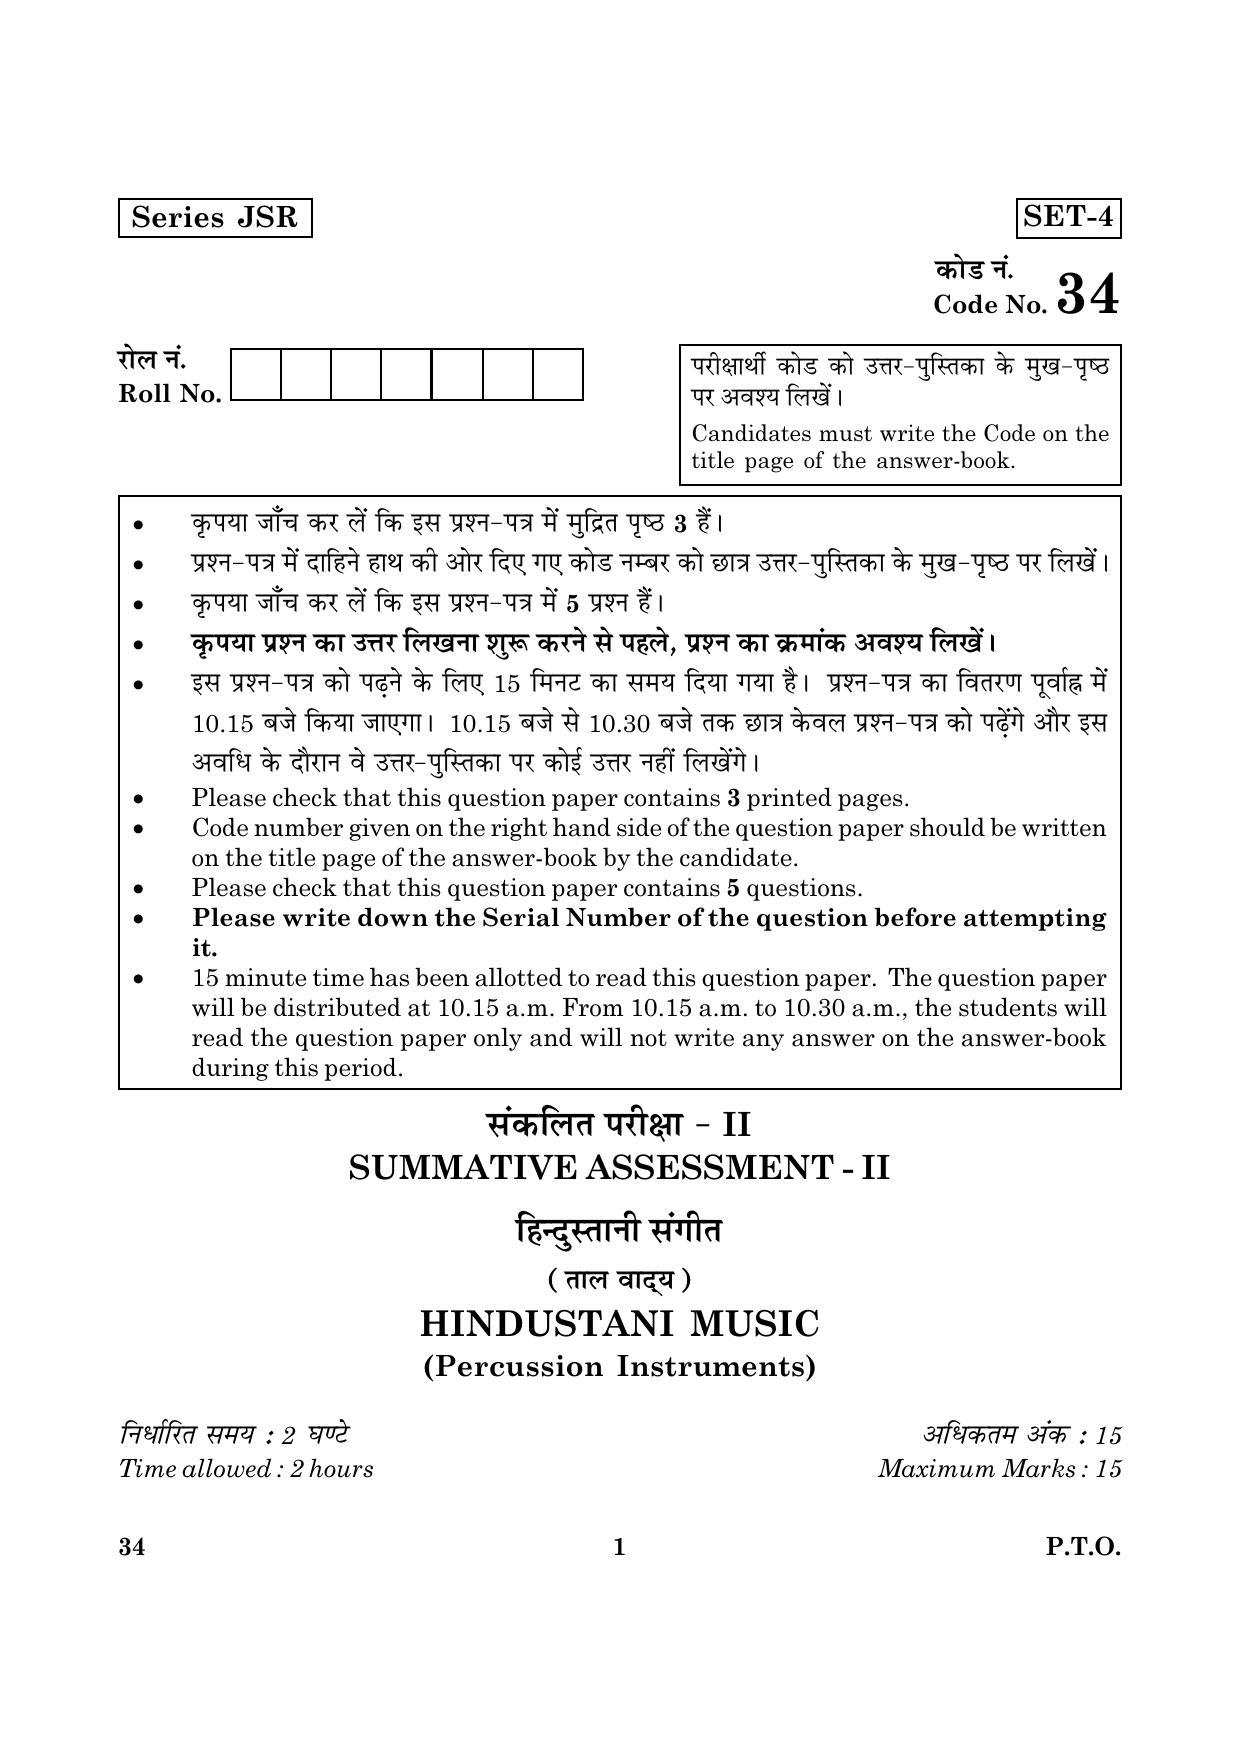 CBSE Class 10 034 Hindustani Music 2016 Question Paper - Page 1